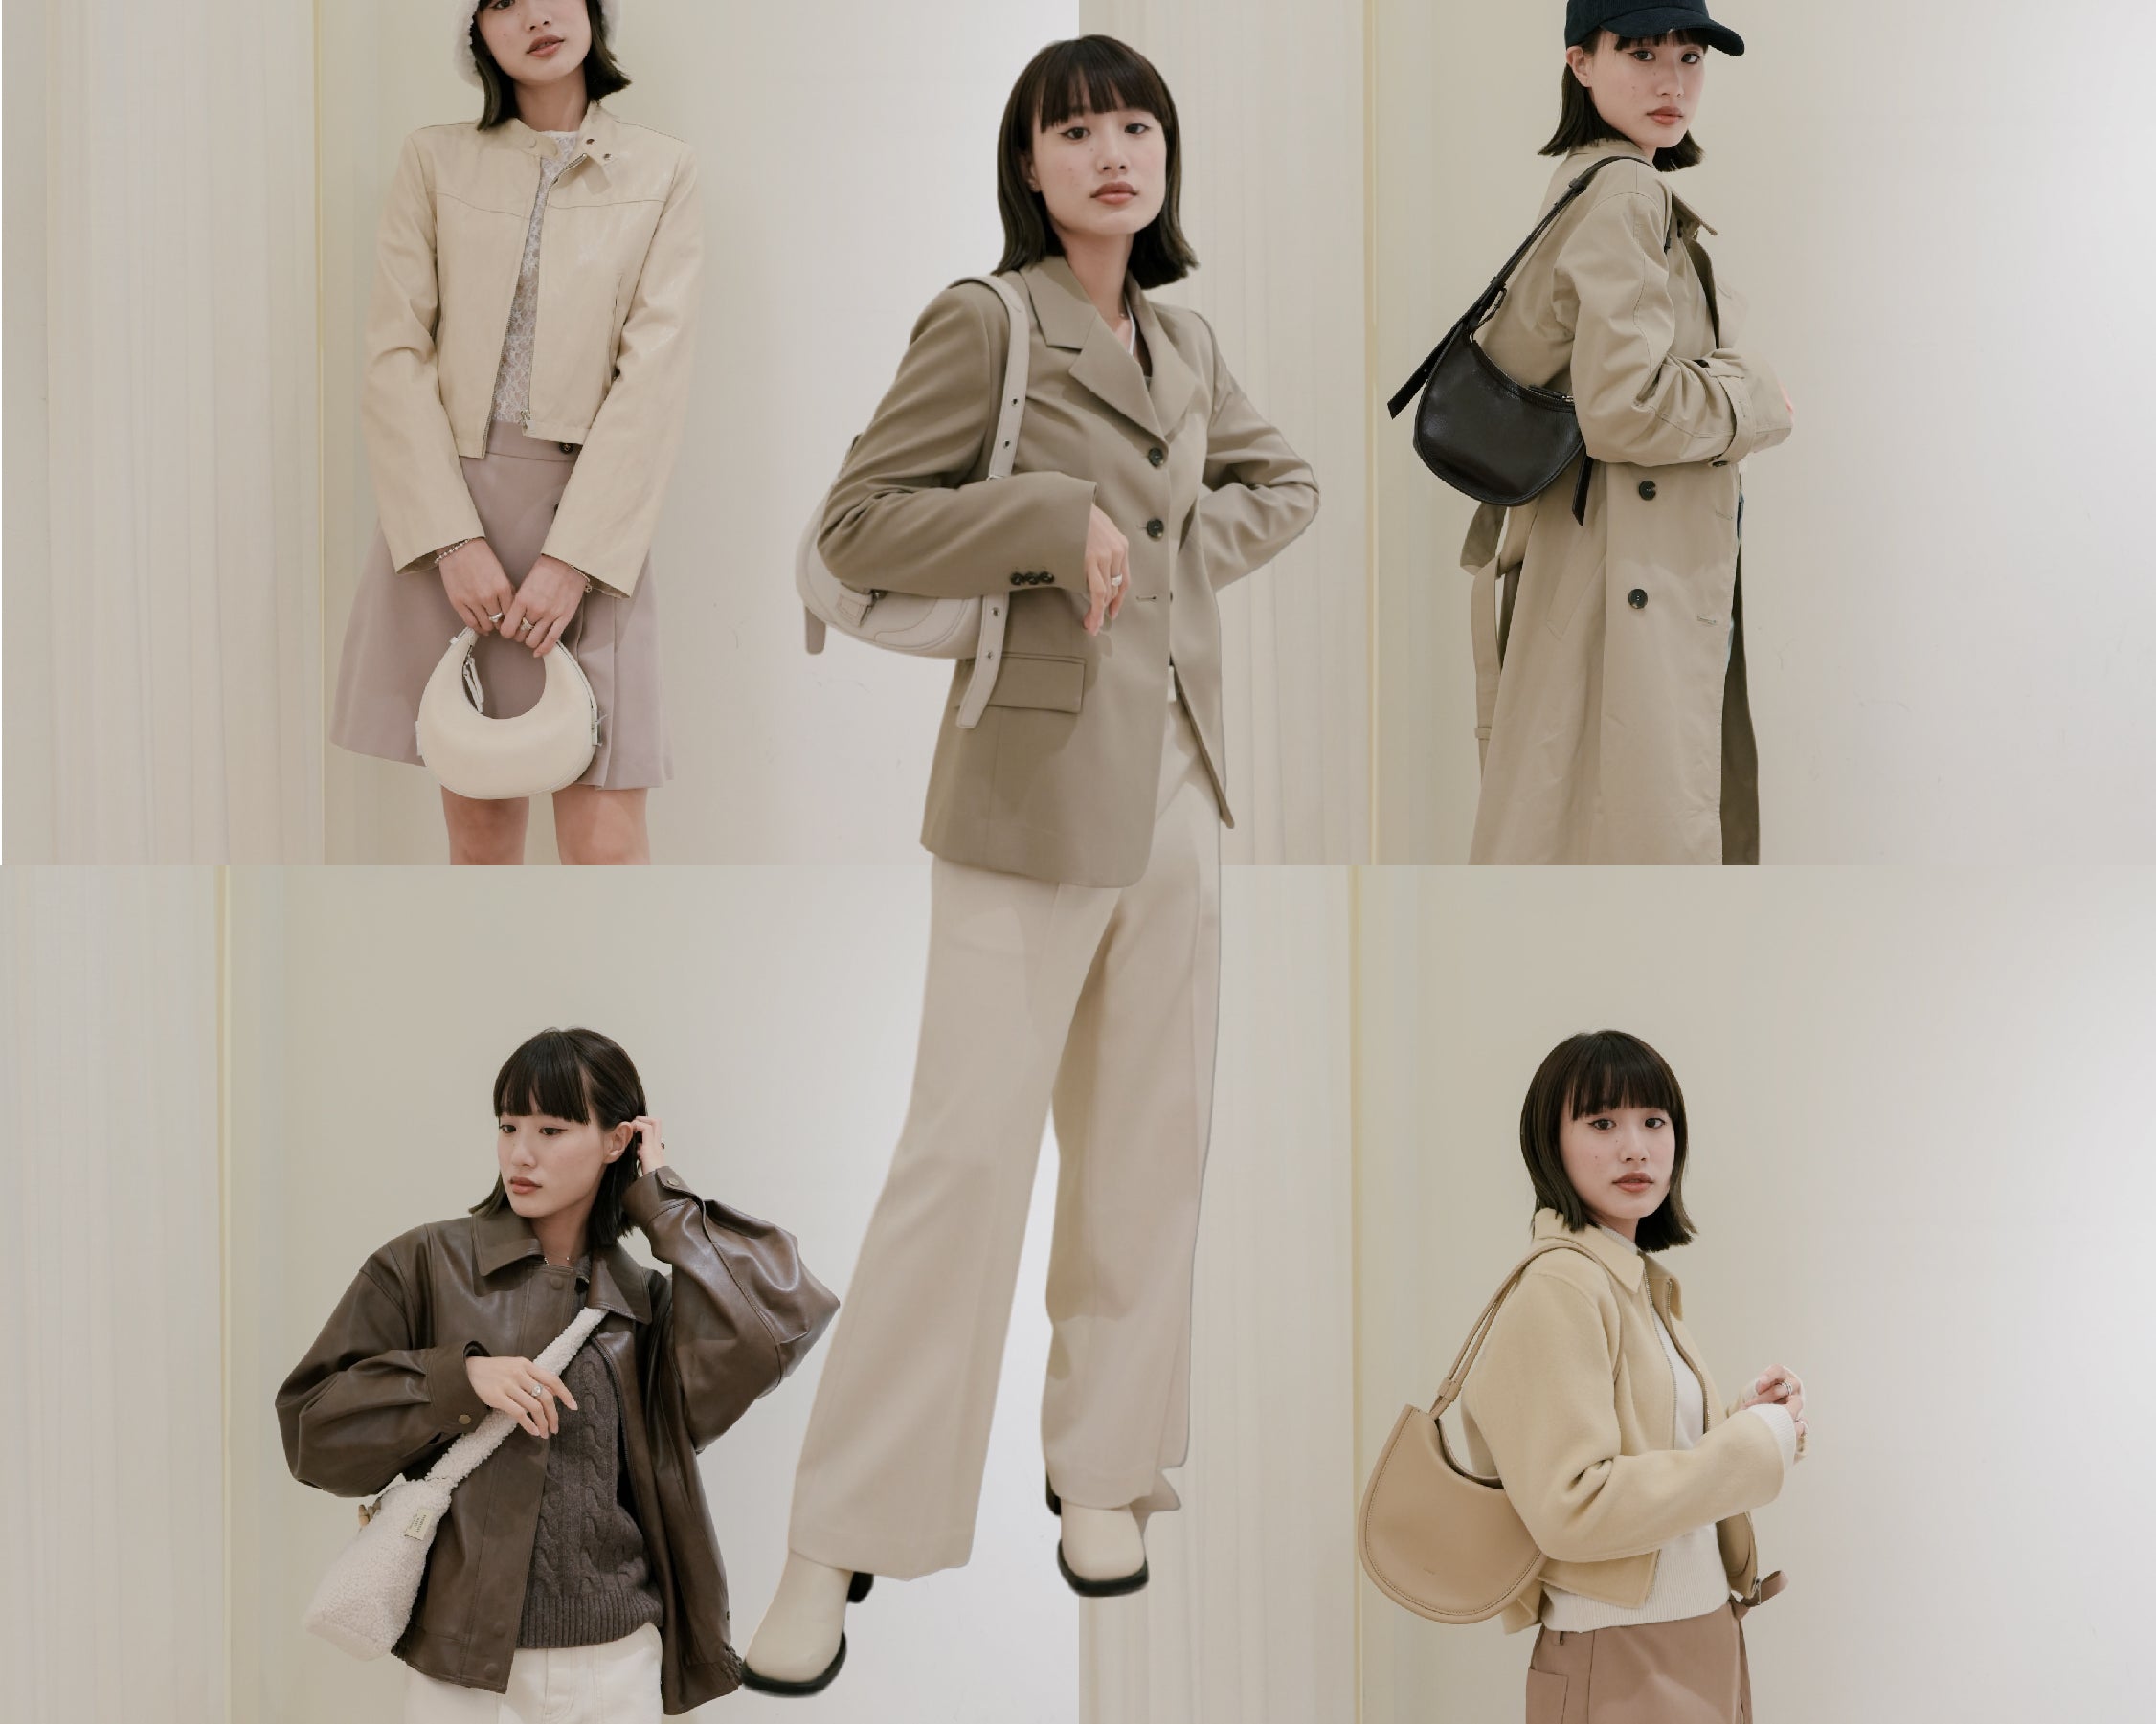 Winter Looks With Pui Yi Leung